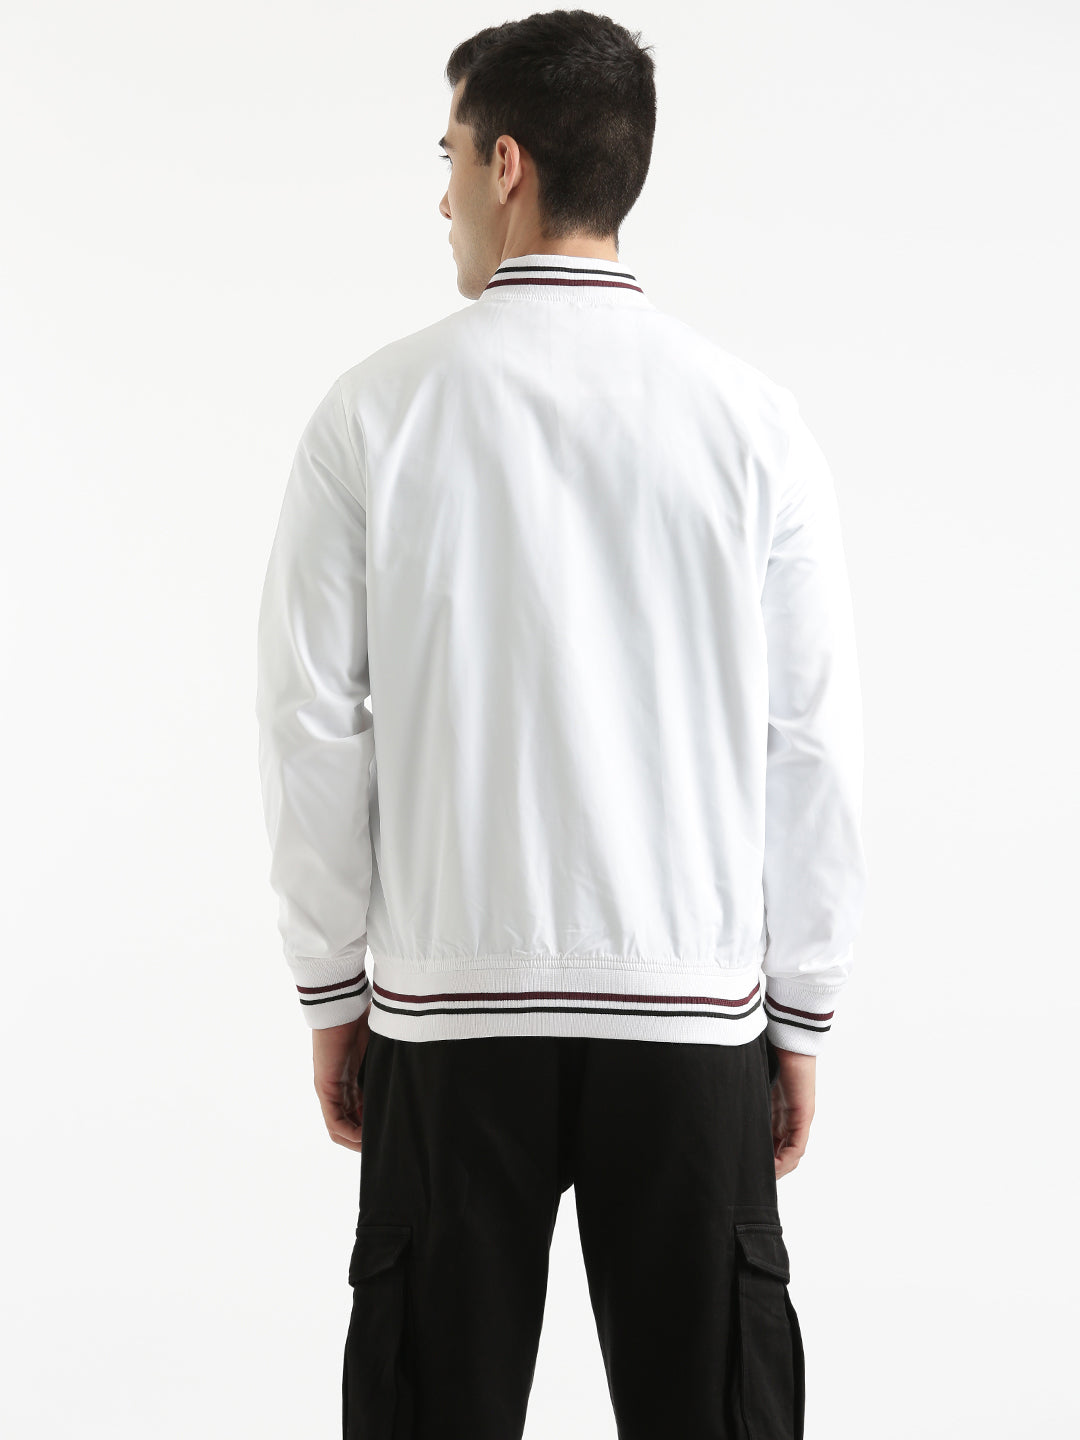 Solid Ace White Jacket